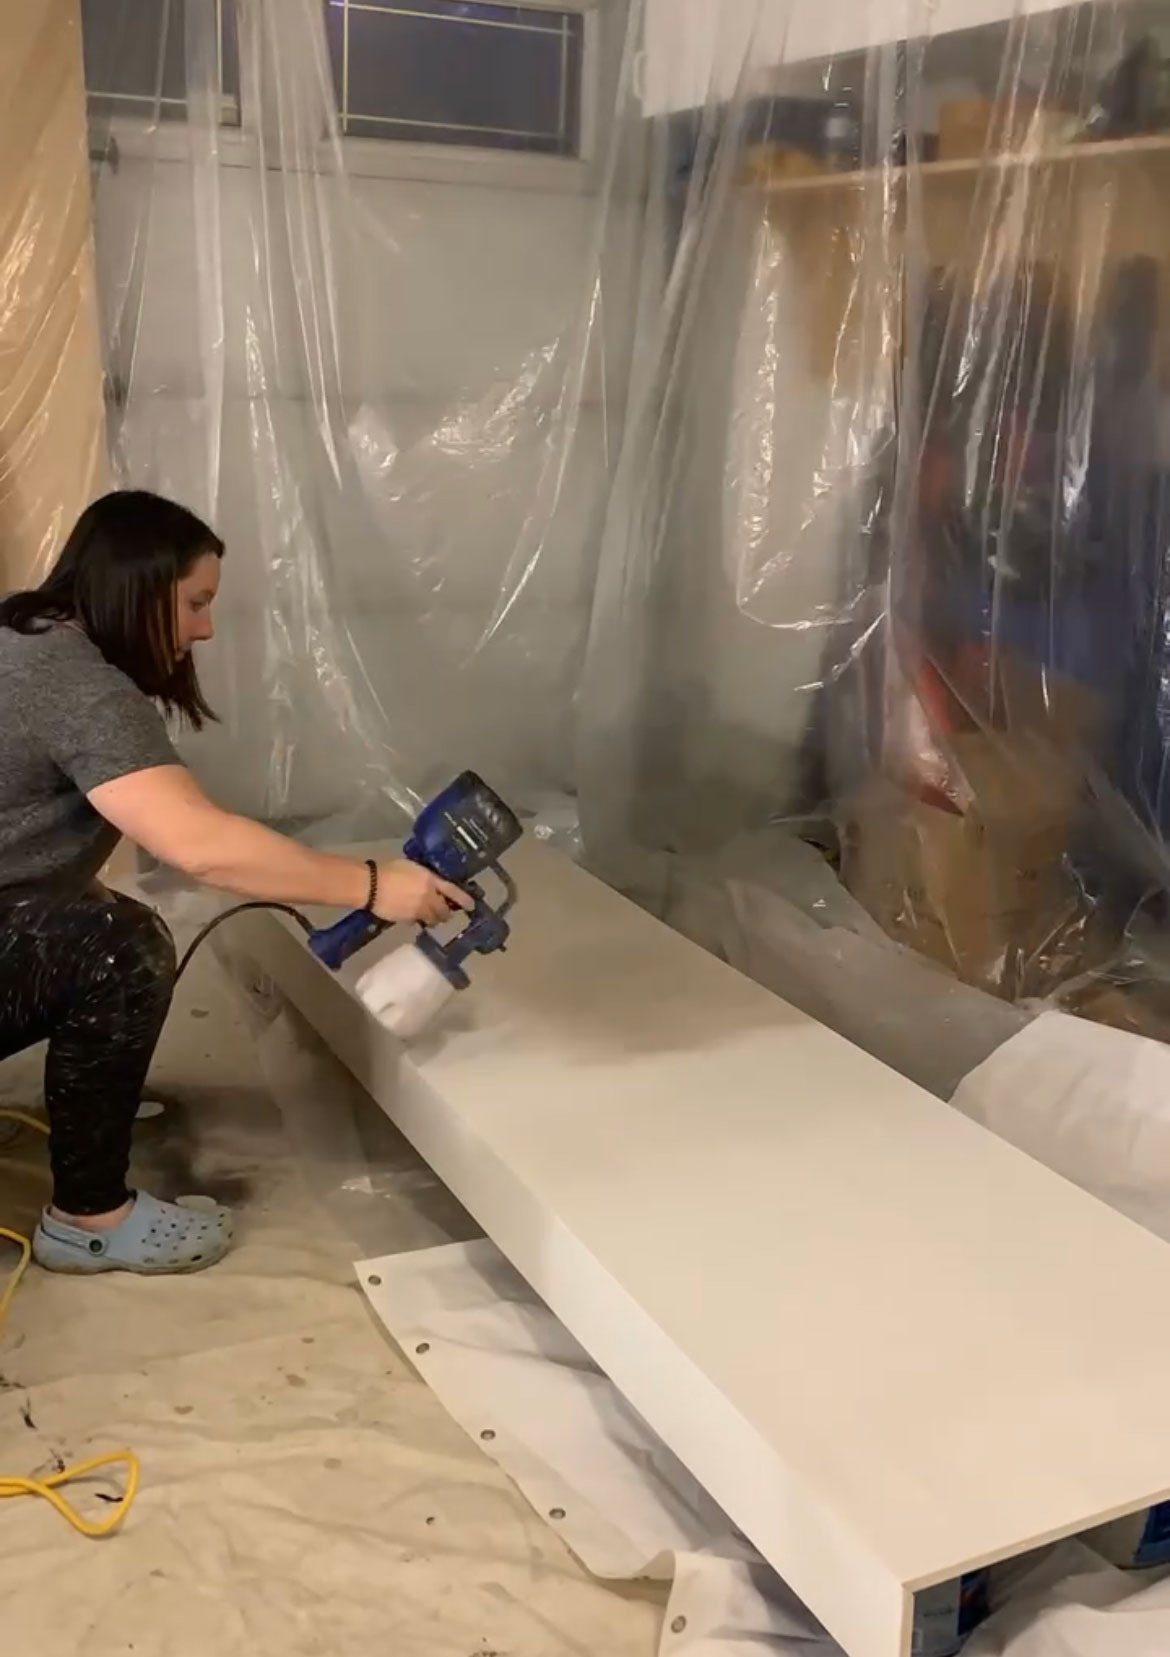 woman using a hand held sprayer to spray a large panel on the ground with brown paint